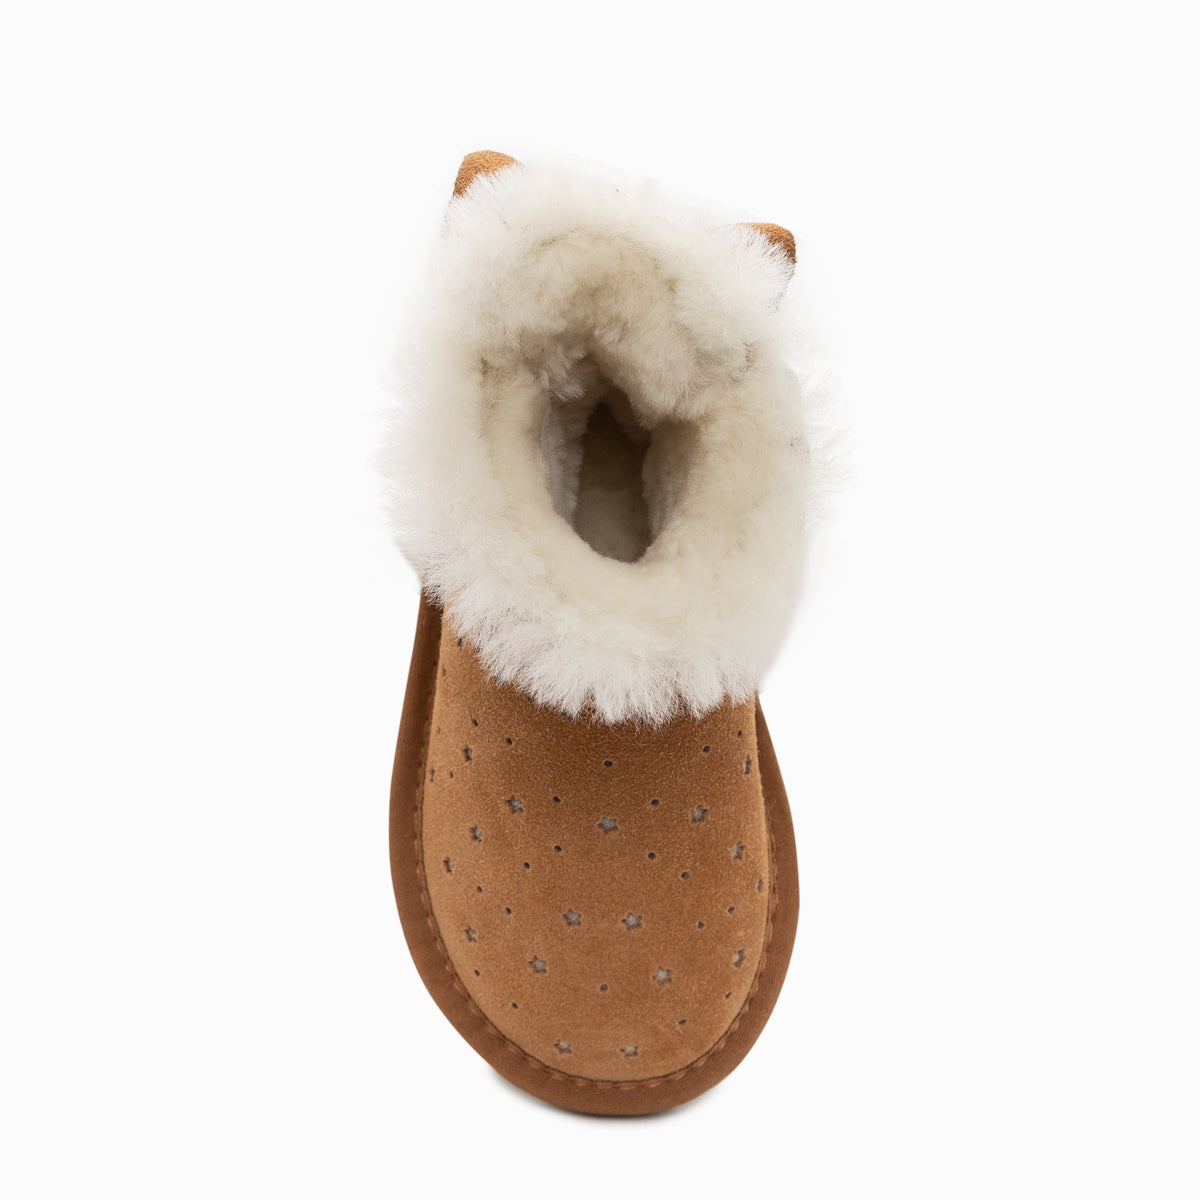 Ugg Kids Mini Bailey Bow Starry Boots-Kid Boots-PEROZ Accessories